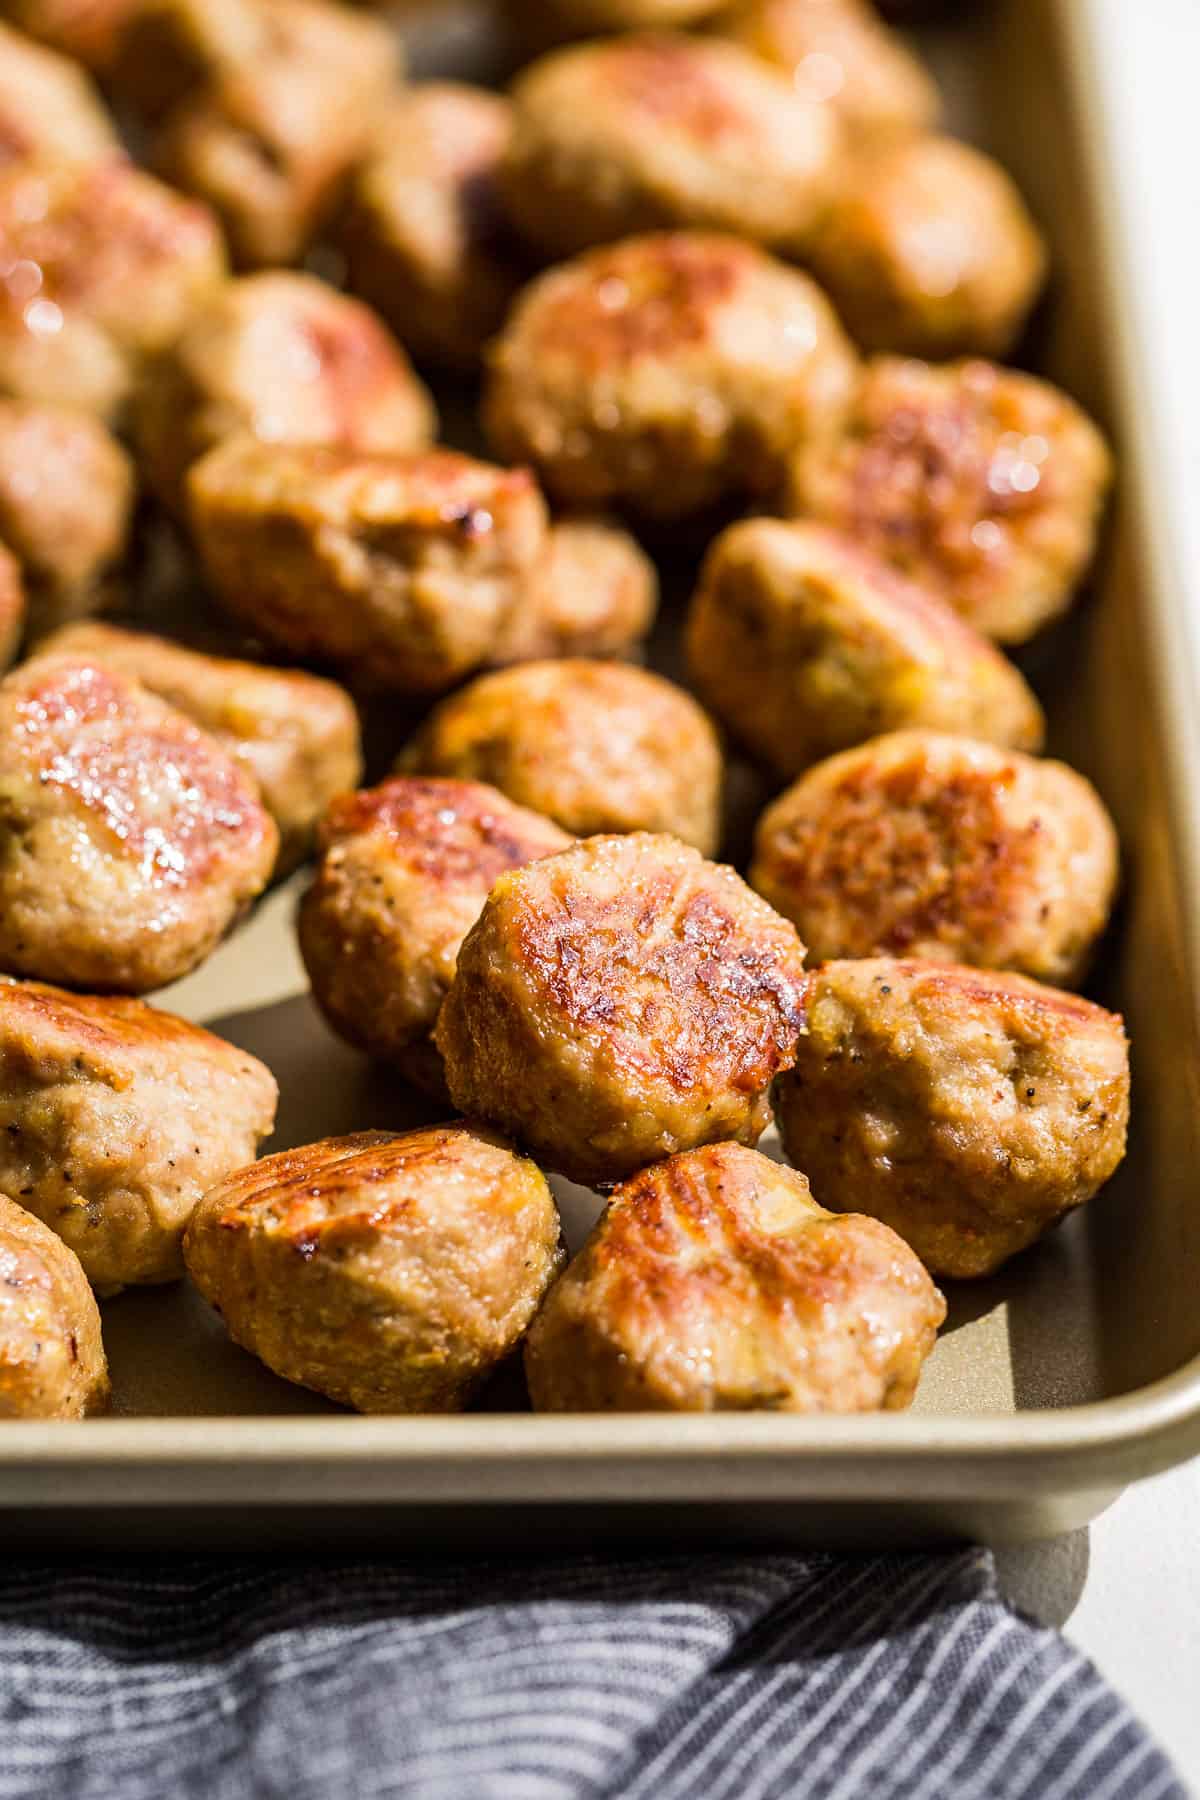 Side view of Baked Turkey Meatballs on a gold baking sheet with a blue linen on the side.